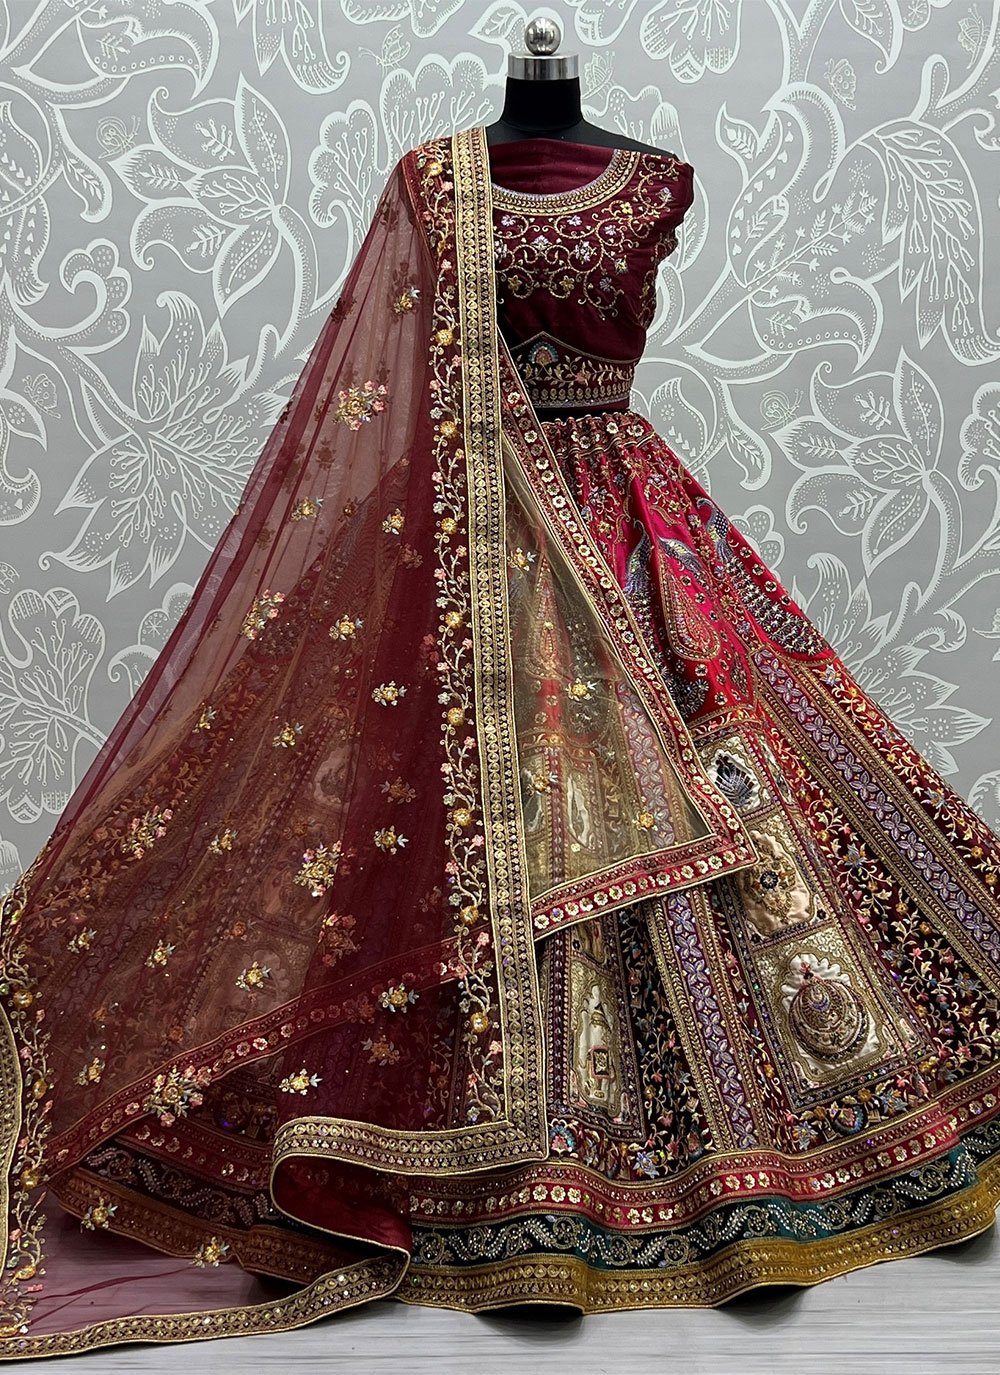 The Sabyasachi Bride Wore A Multi-Coloured Lehenga And Donned It With A Rajwada  Style 'Dupatta'